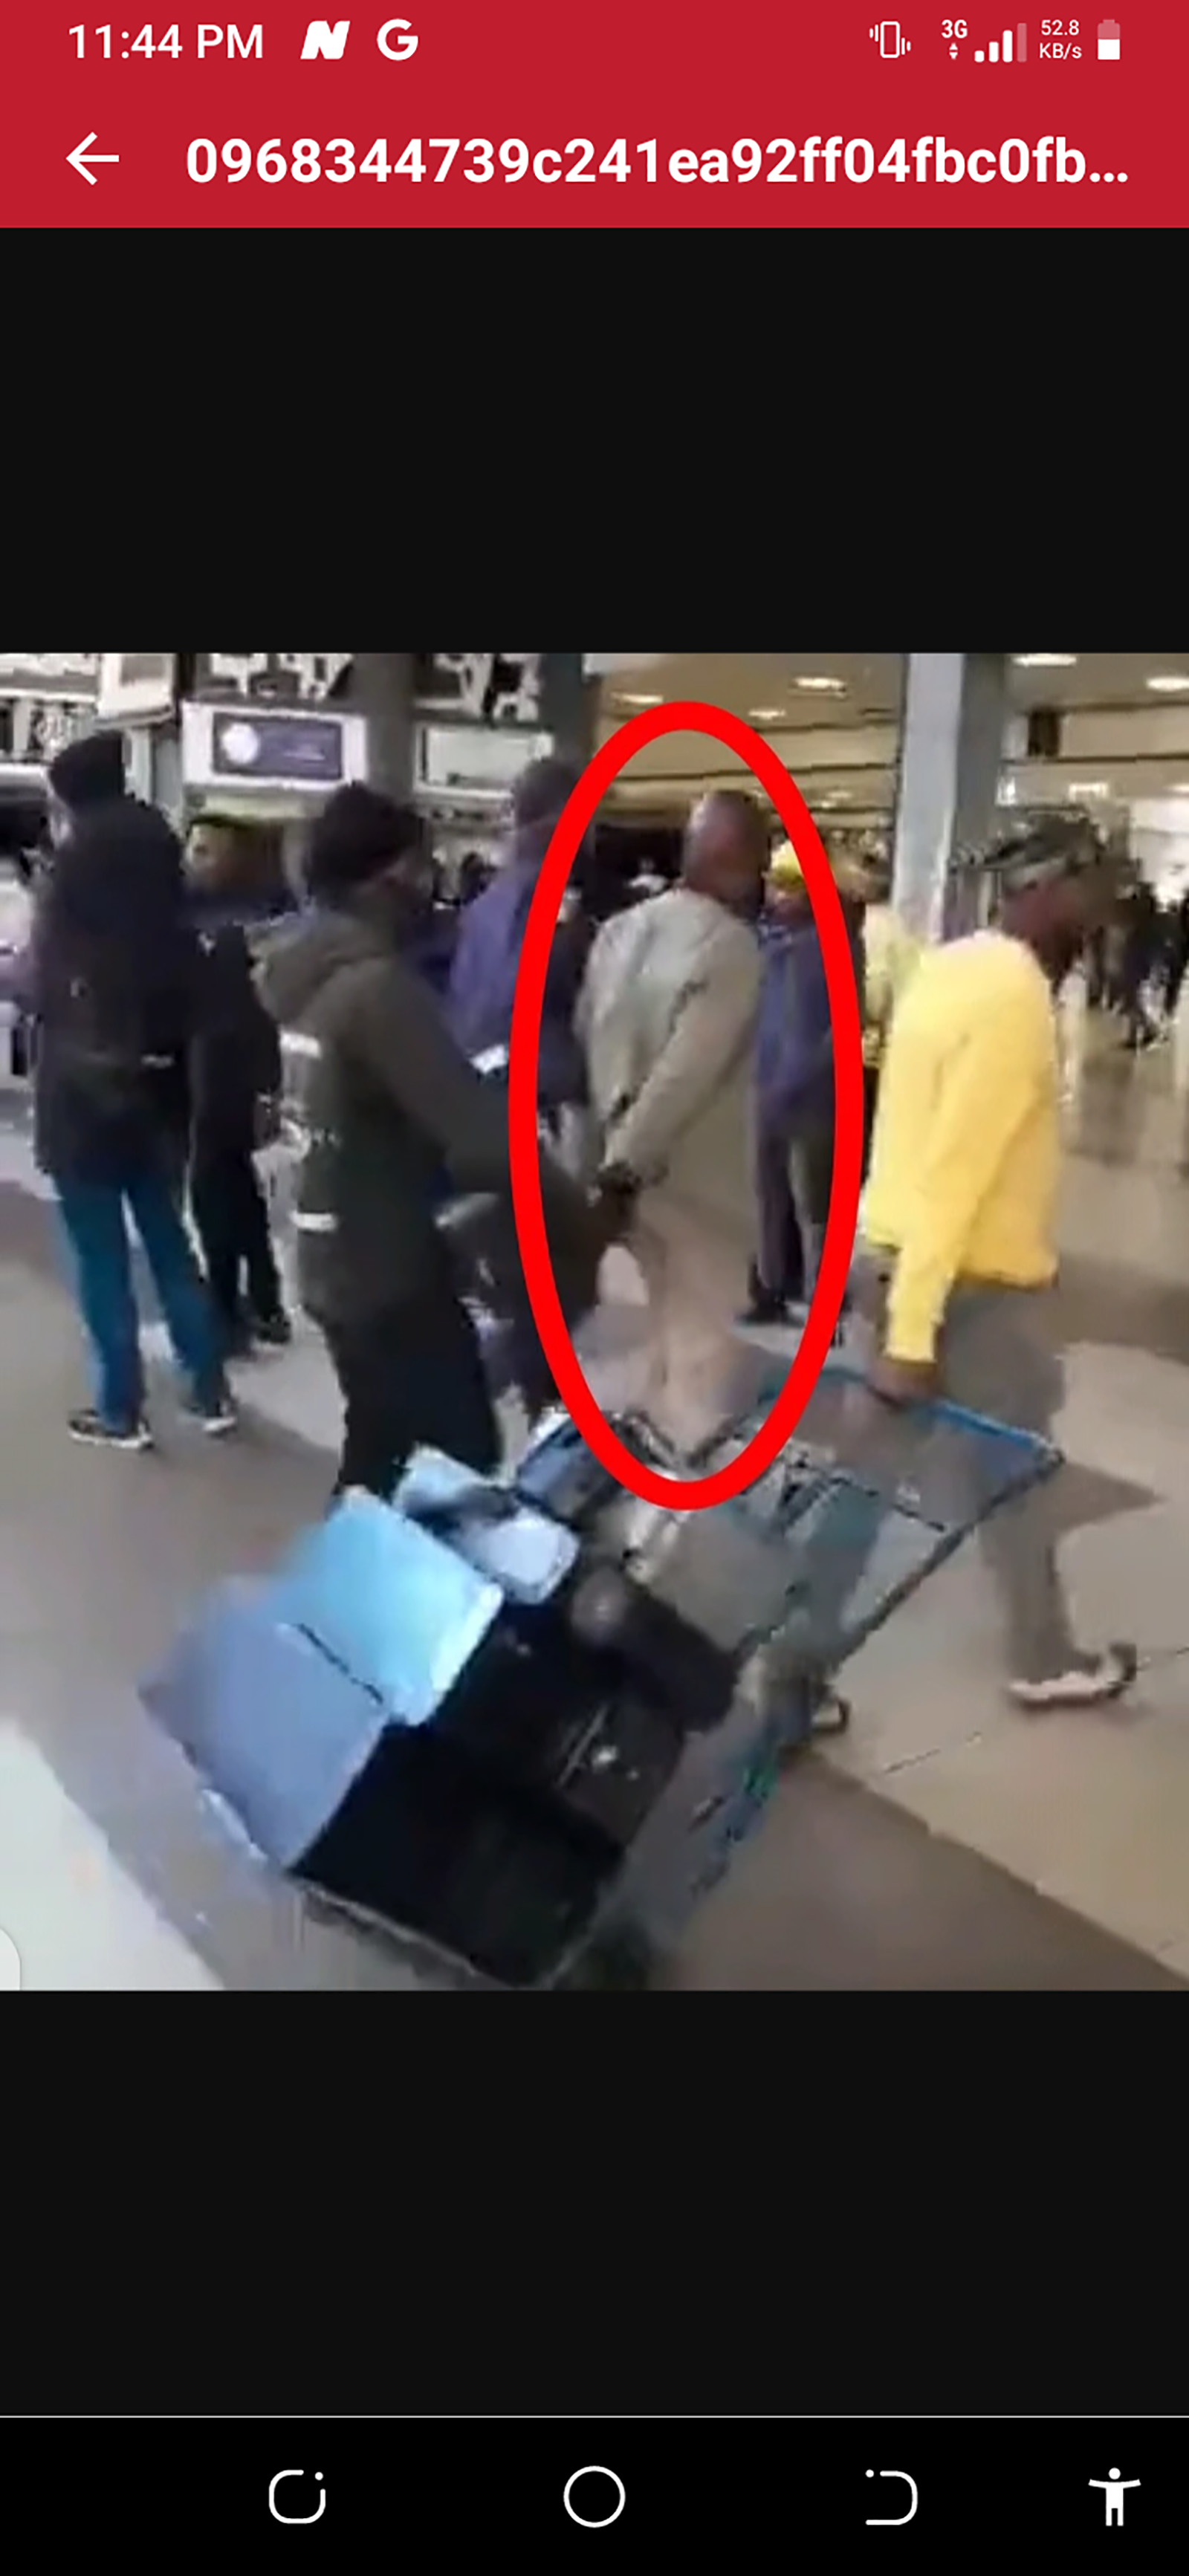 It Ends In Tears For An Illegal Foreigner Who Had His Home Affairs Office At The Park Station 1